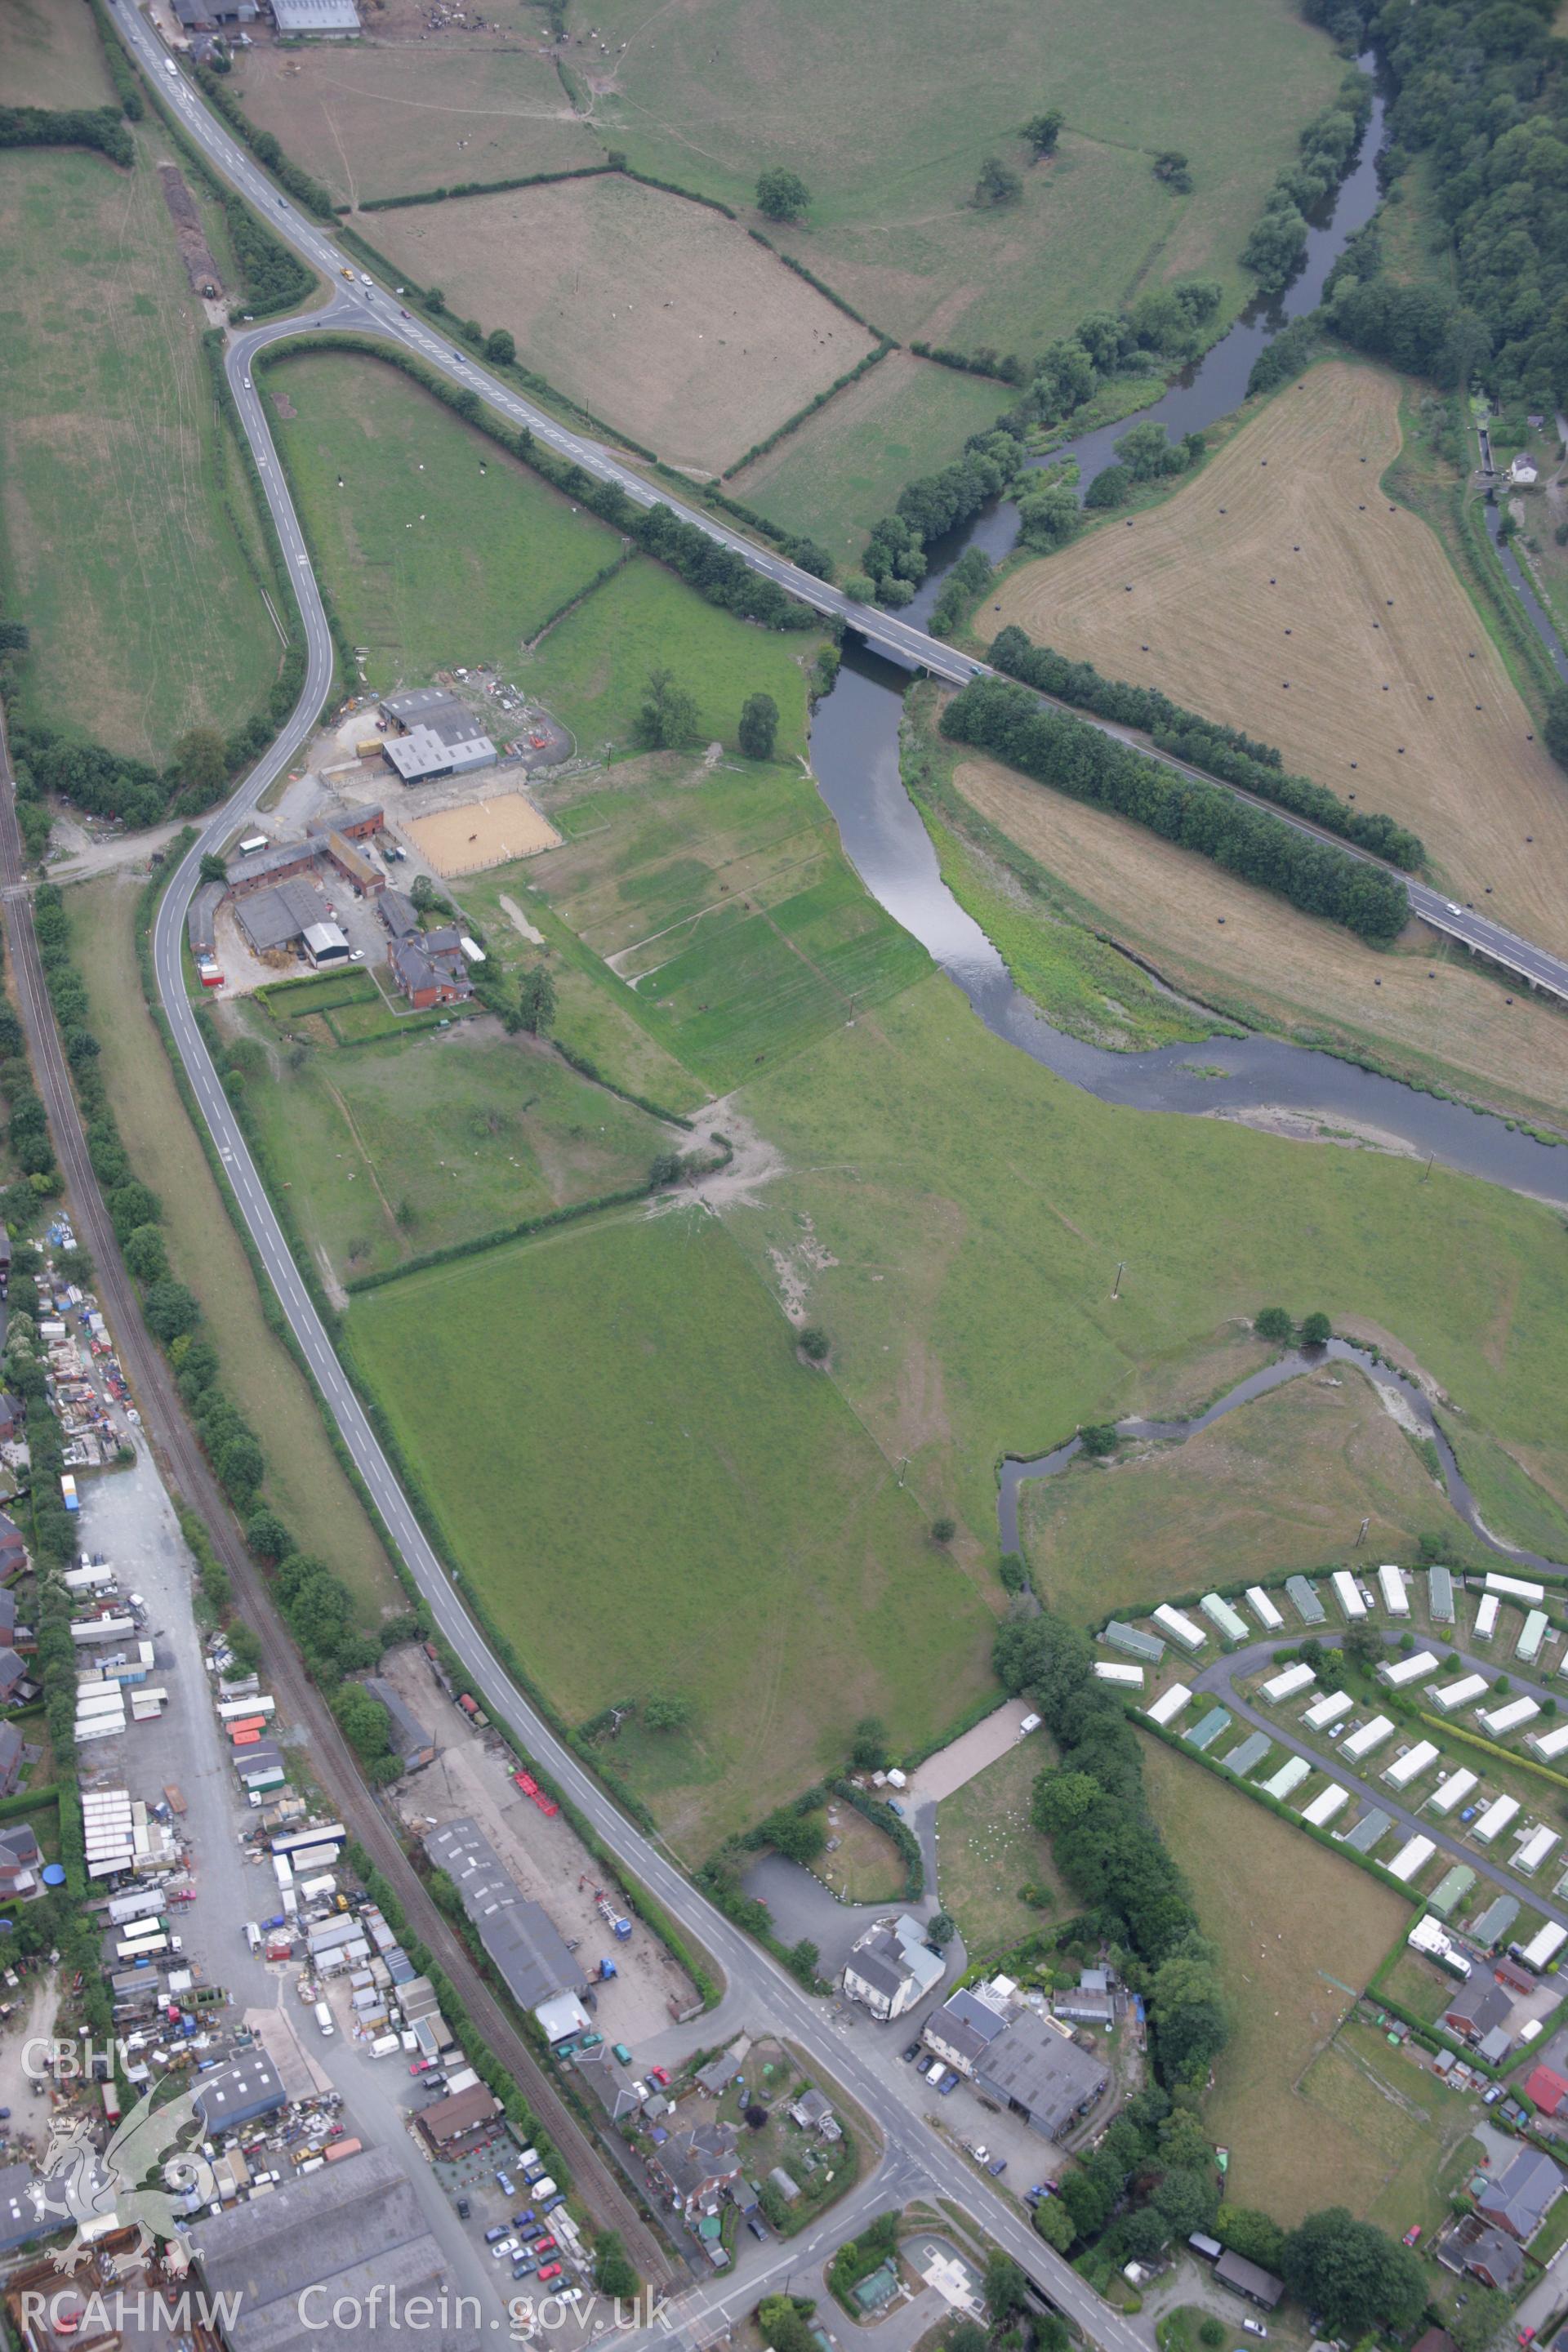 RCAHMW colour oblique aerial photograph of possible cropmarks of a Roman Road at The Court, Abermule. Taken on 14 August 2006 by Toby Driver.